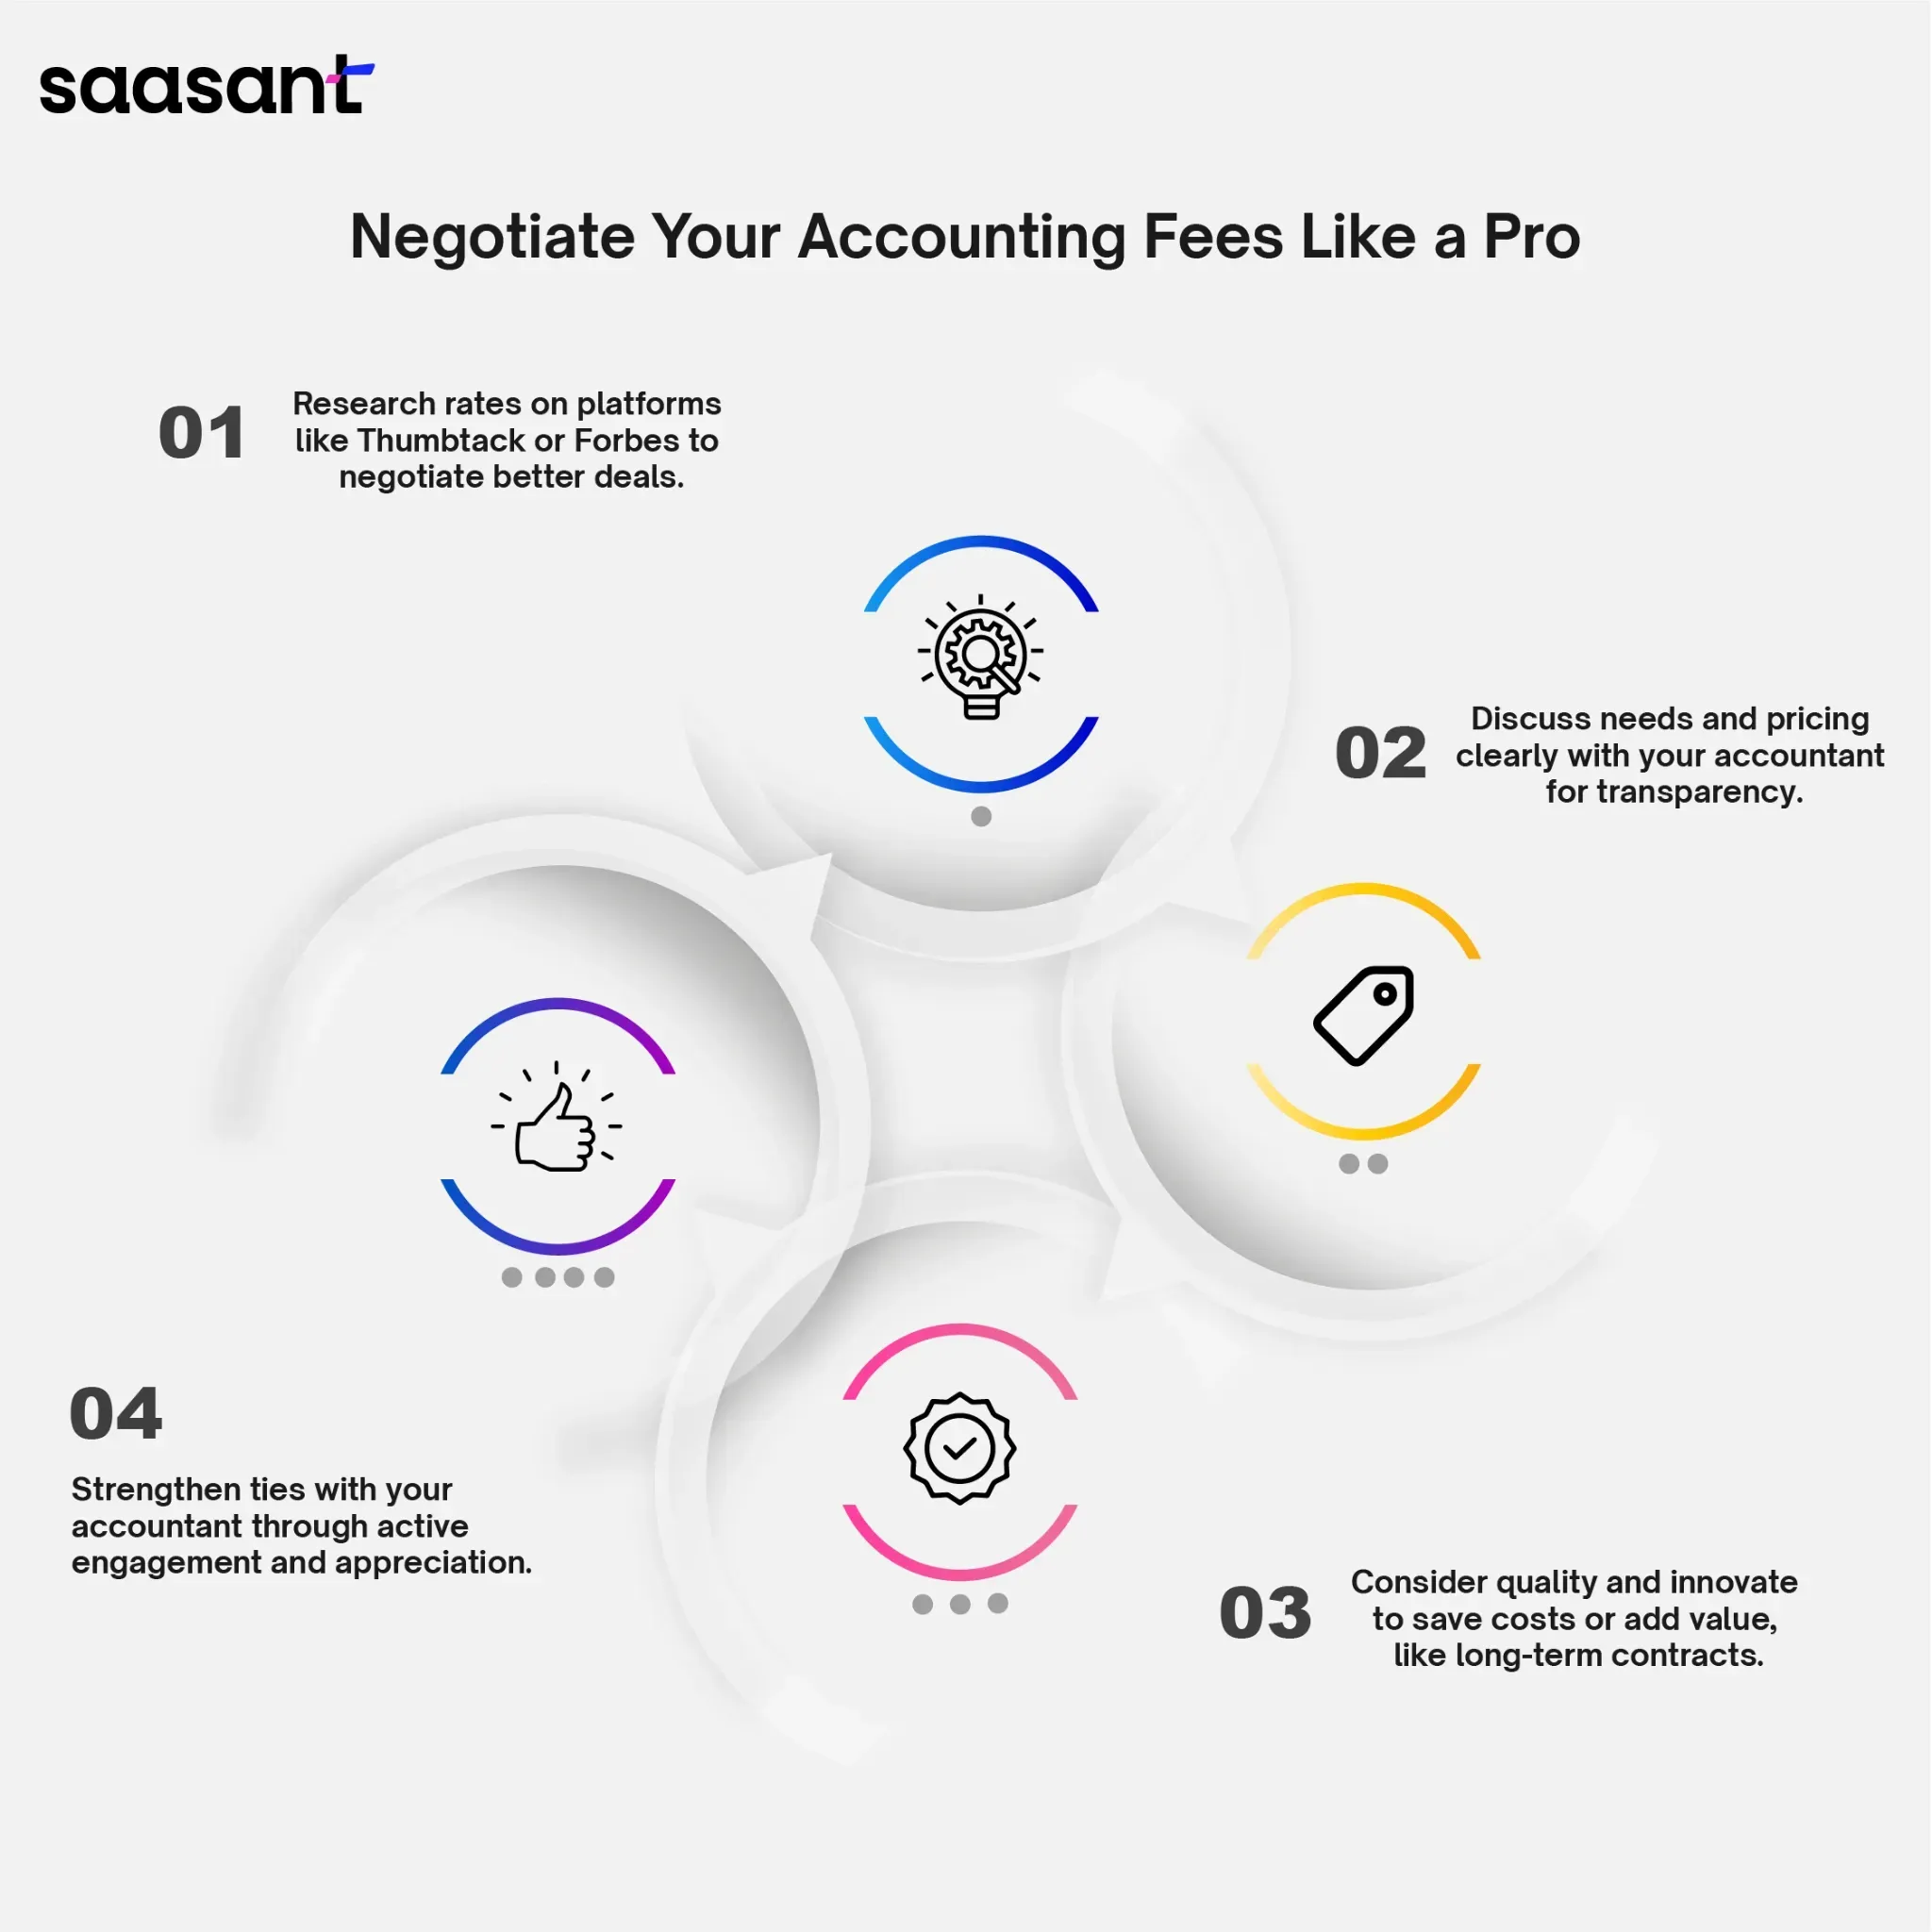 How Do You Negotiate Your Accounting Fees Like a Pro?